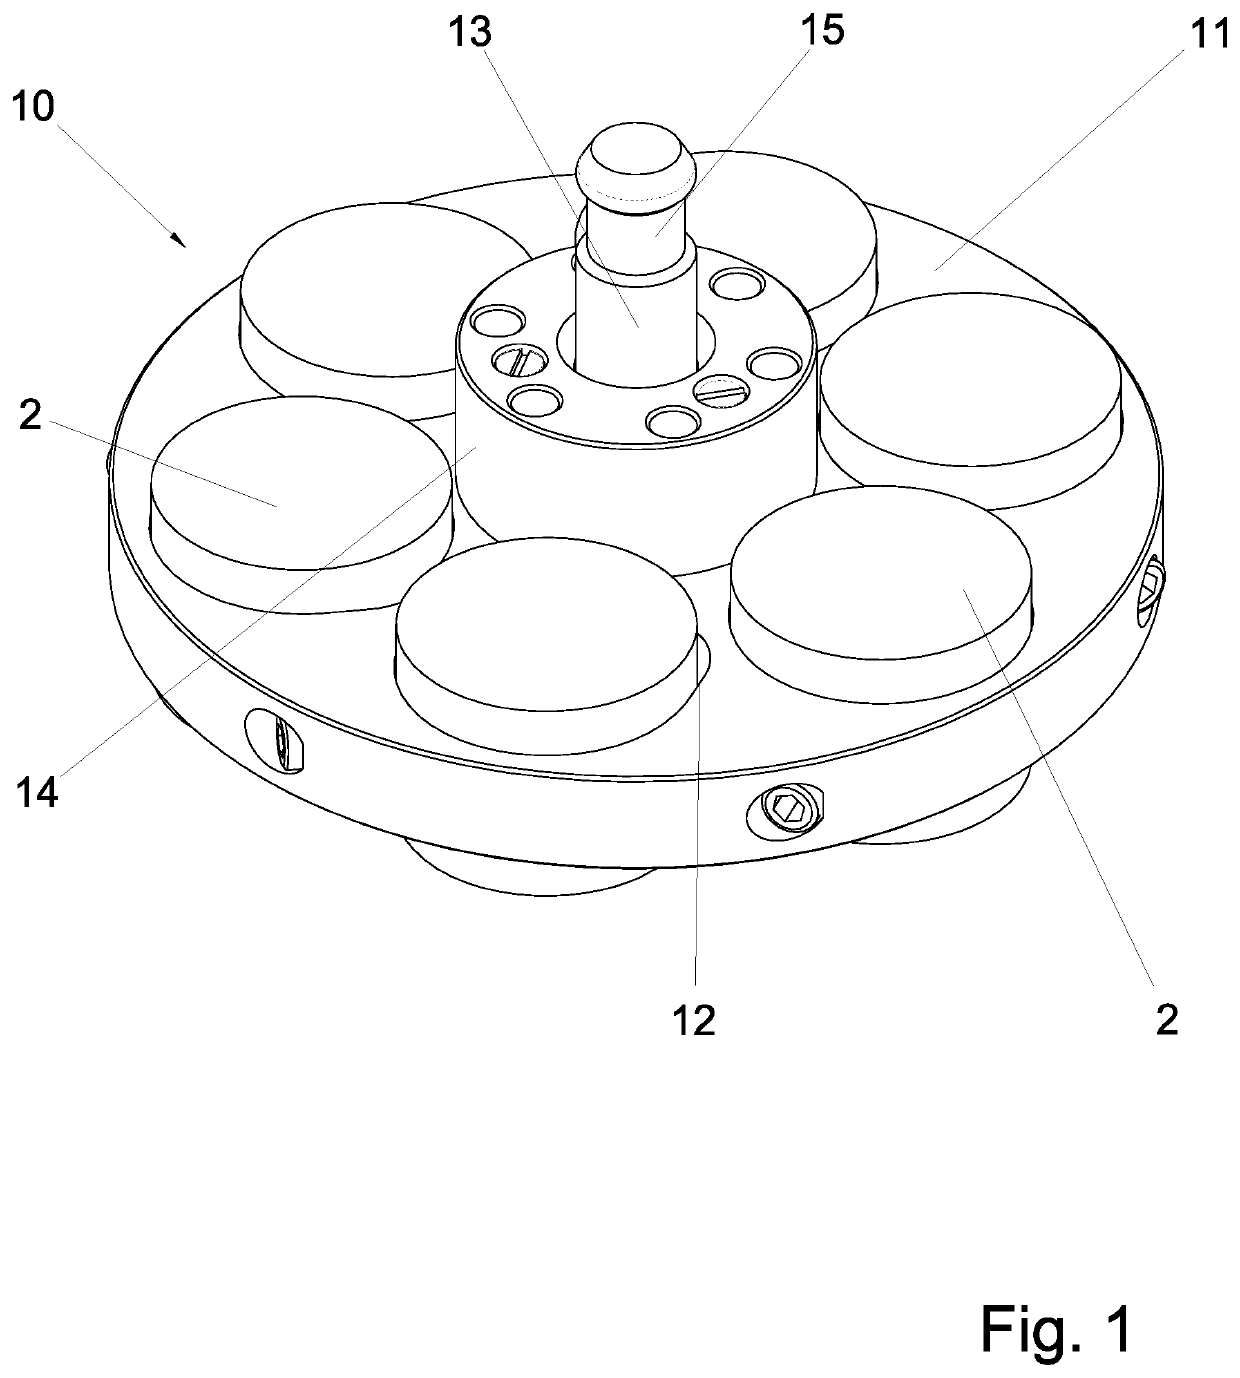 Method of, and an apparatus for, rinsing materialographic samples